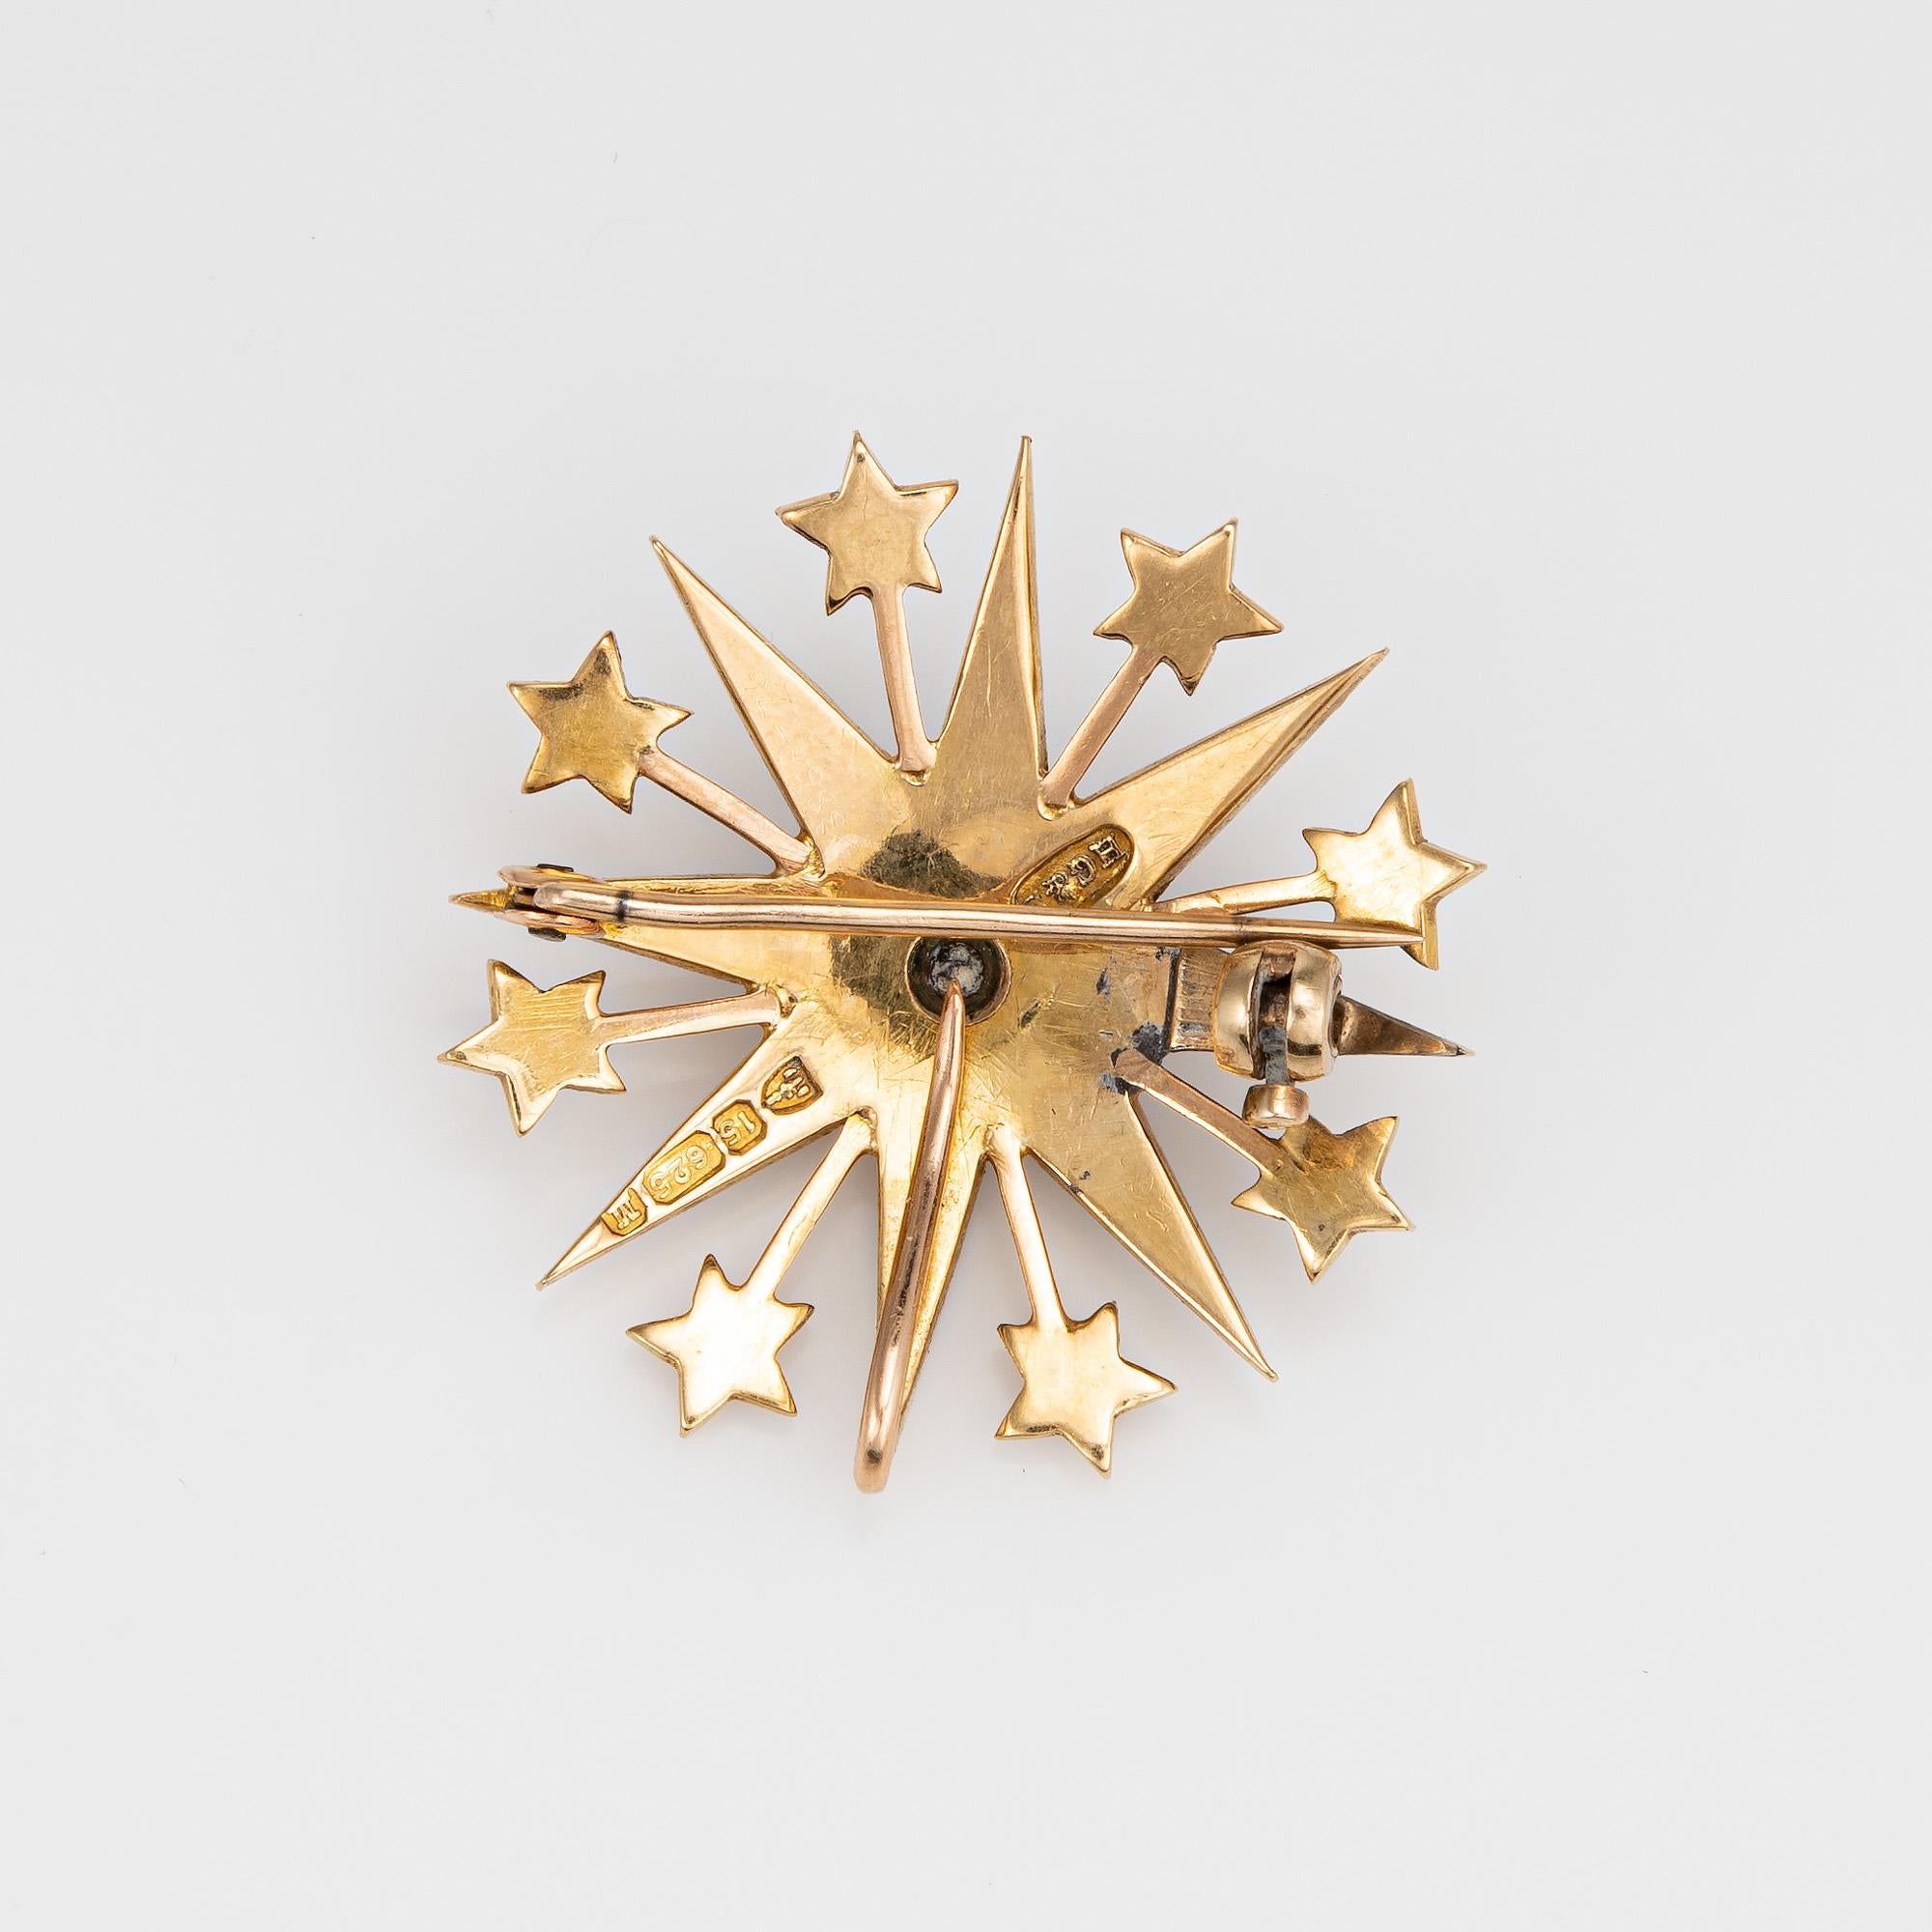 Finely detailed Victorian starburst pendant or brooch (circa 1895), crafted in 15 karat yellow gold. 

Seed pearls range in size from 1mm to 2.5mm. The pearls are in-tact and in good condition.

The starburst motif was popular during the Victorian